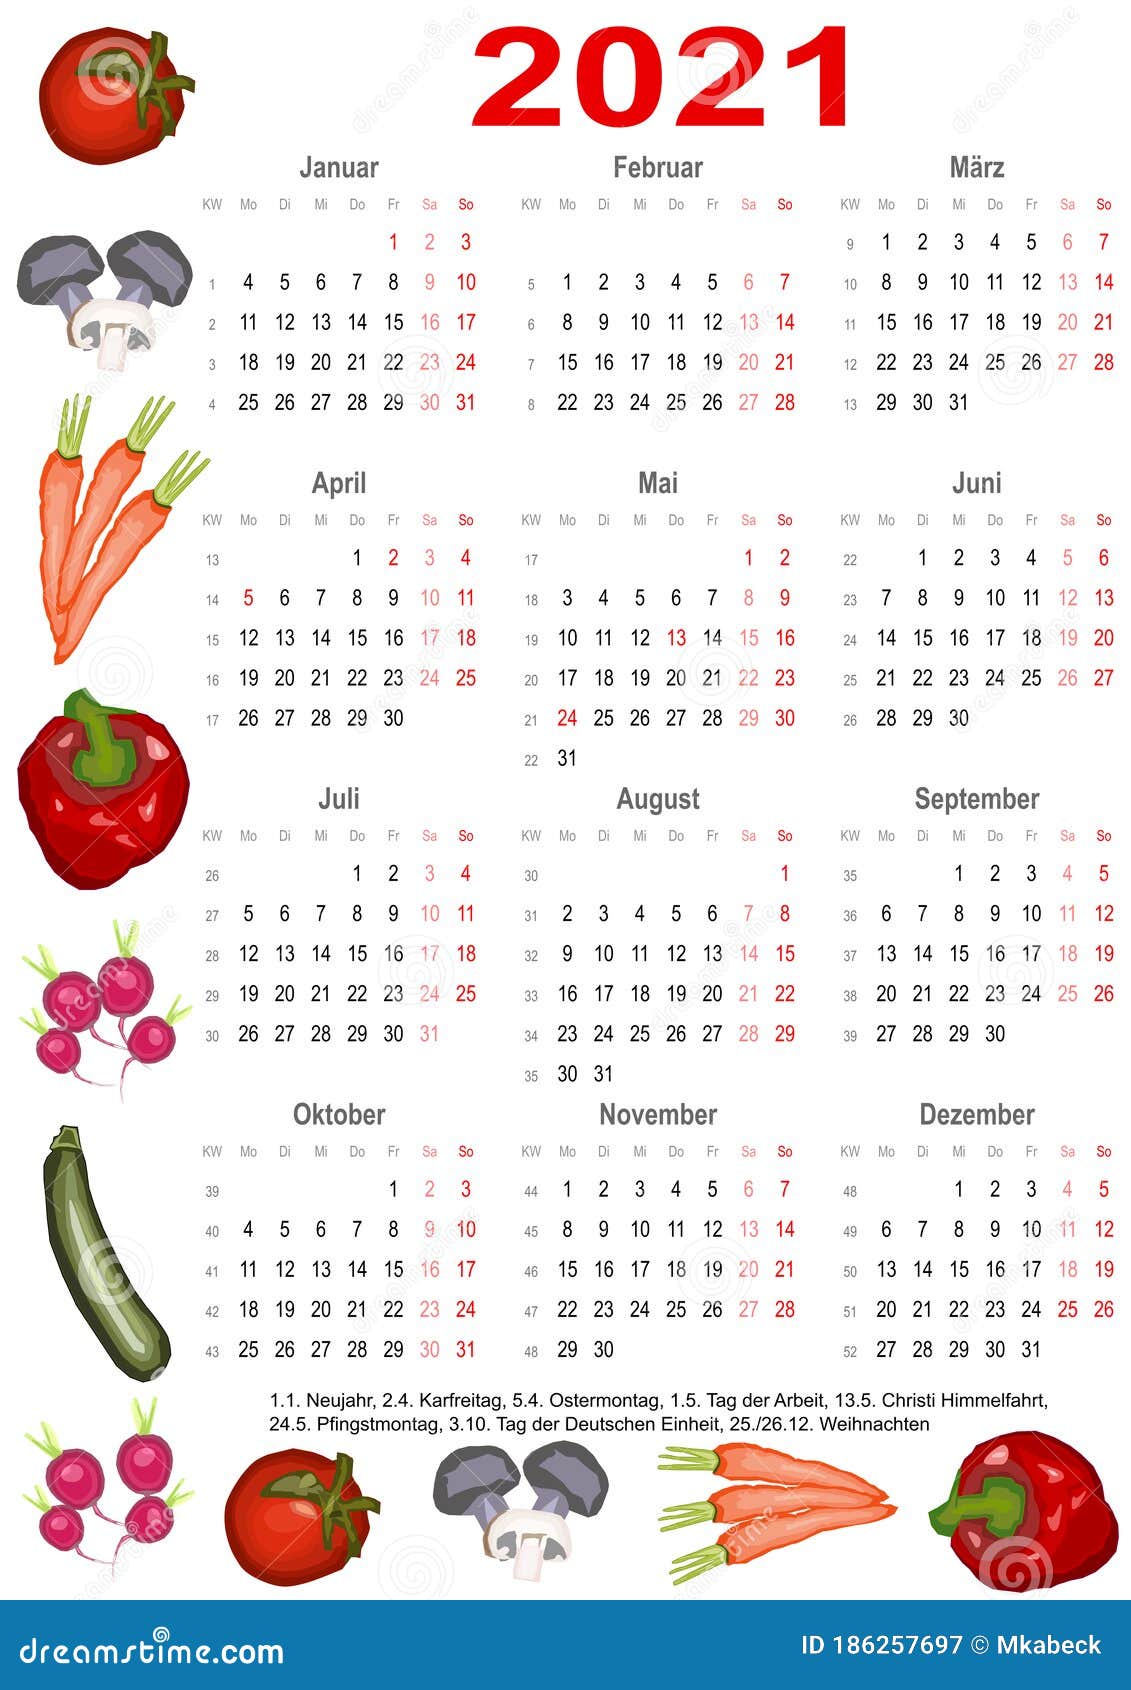 Calendar 2021 For Ger With Various Vegetables Stock Vector Illustration Of Holiday Design 186257697